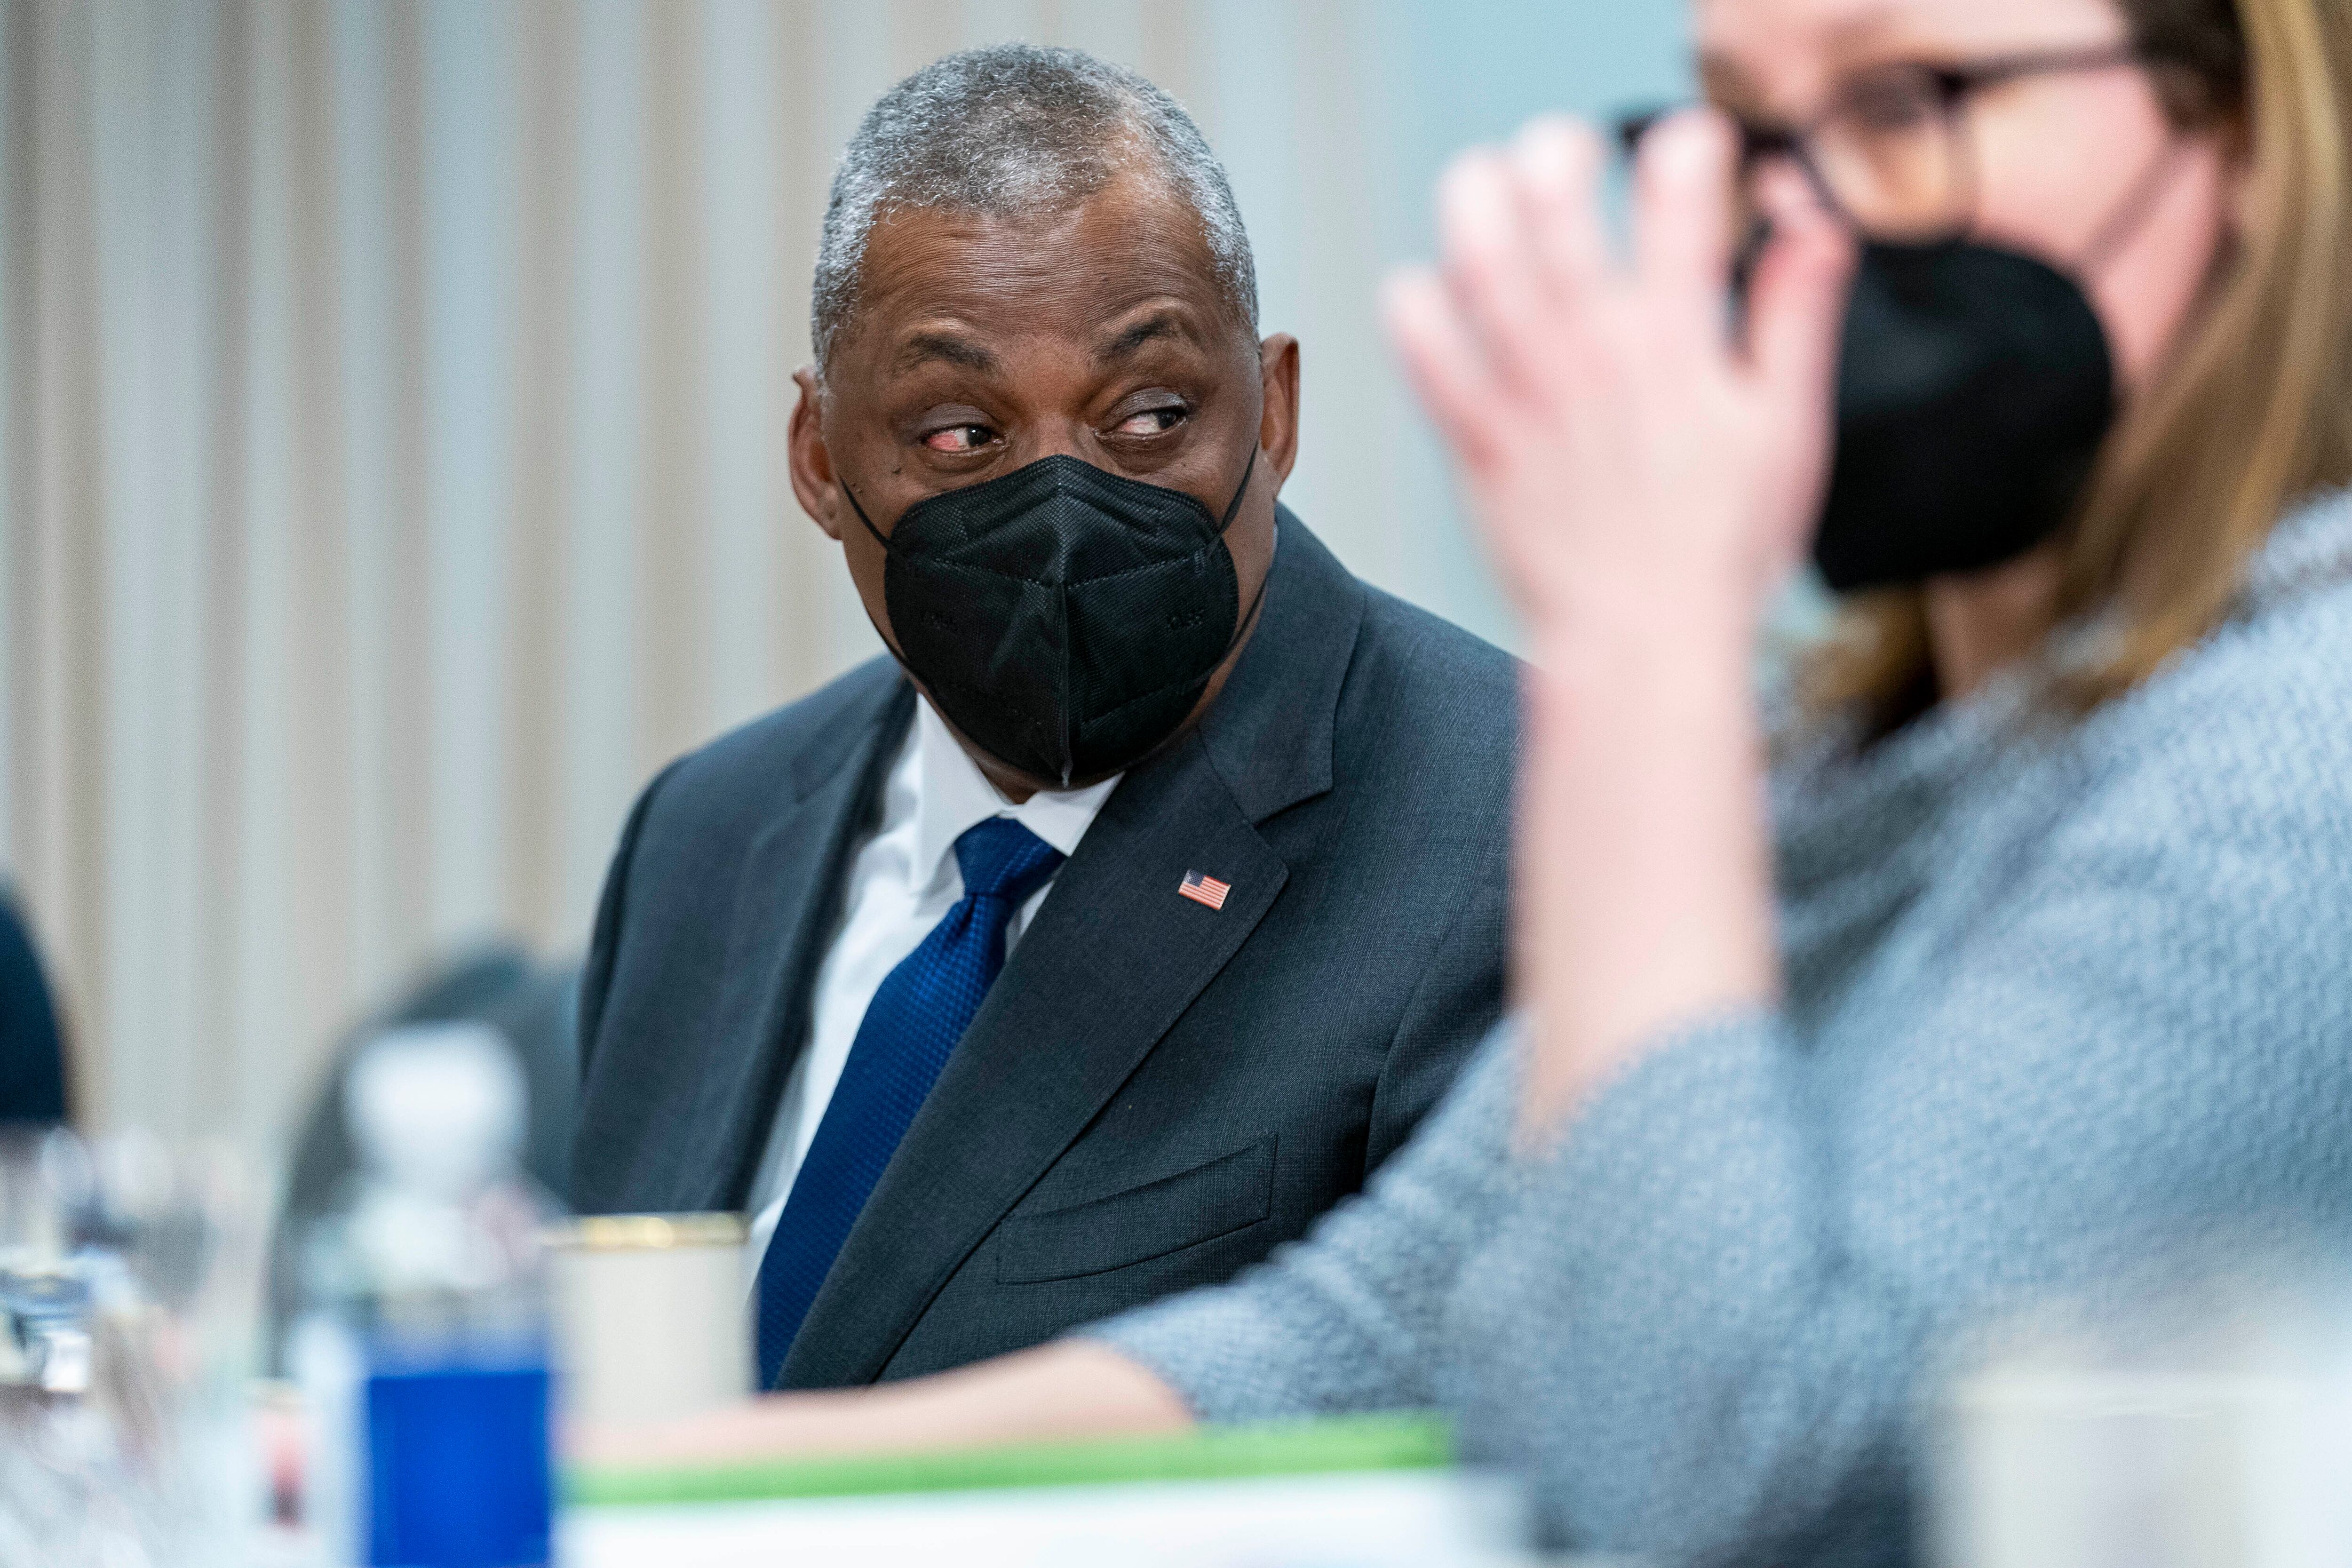 Secretary of Defense Lloyd Austin appears during a meeting with Singapore's Prime Minister Lee Hsien Loong at the Pentagon, Monday, March 28, 2022, in Washington. (Andrew Harnik/AP)